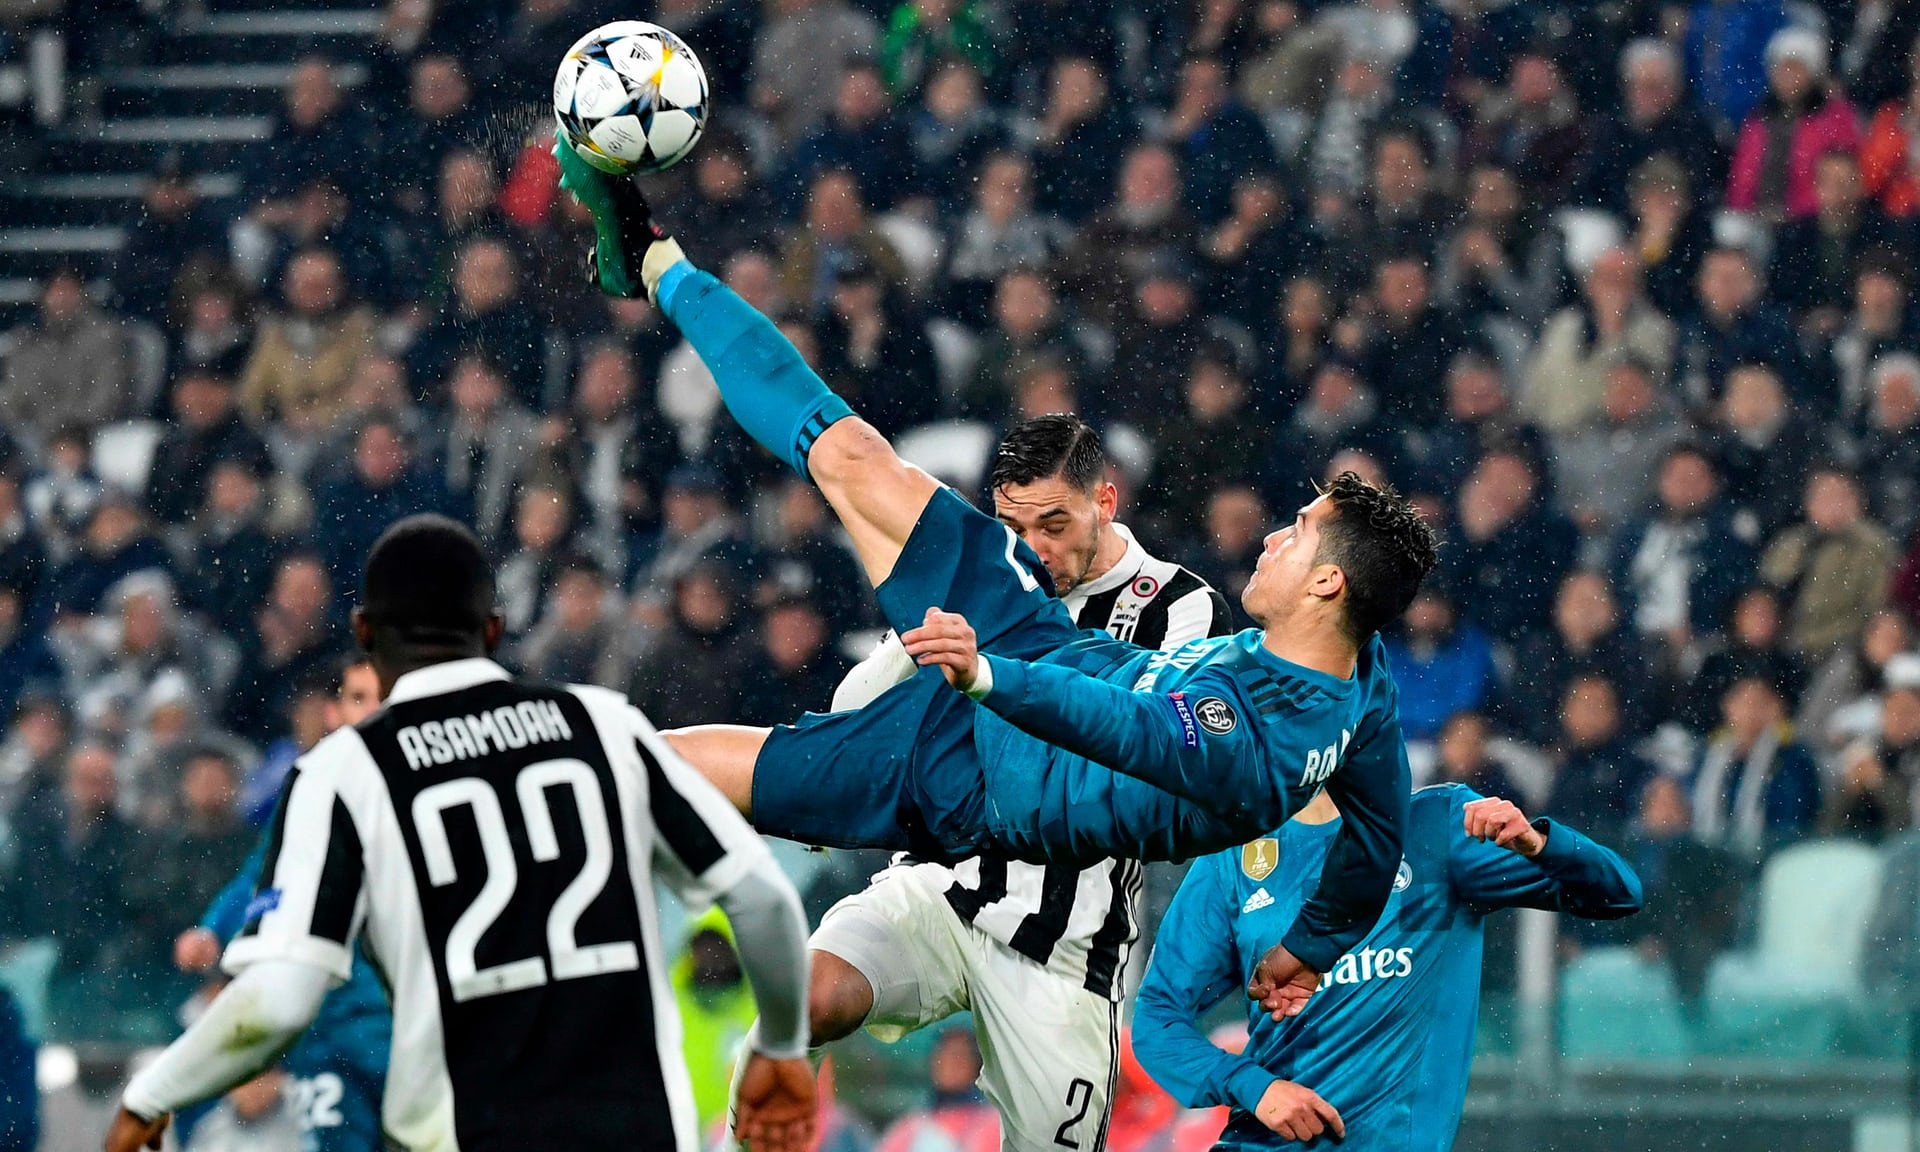 One of the best goal of CR7 !! — Steemit